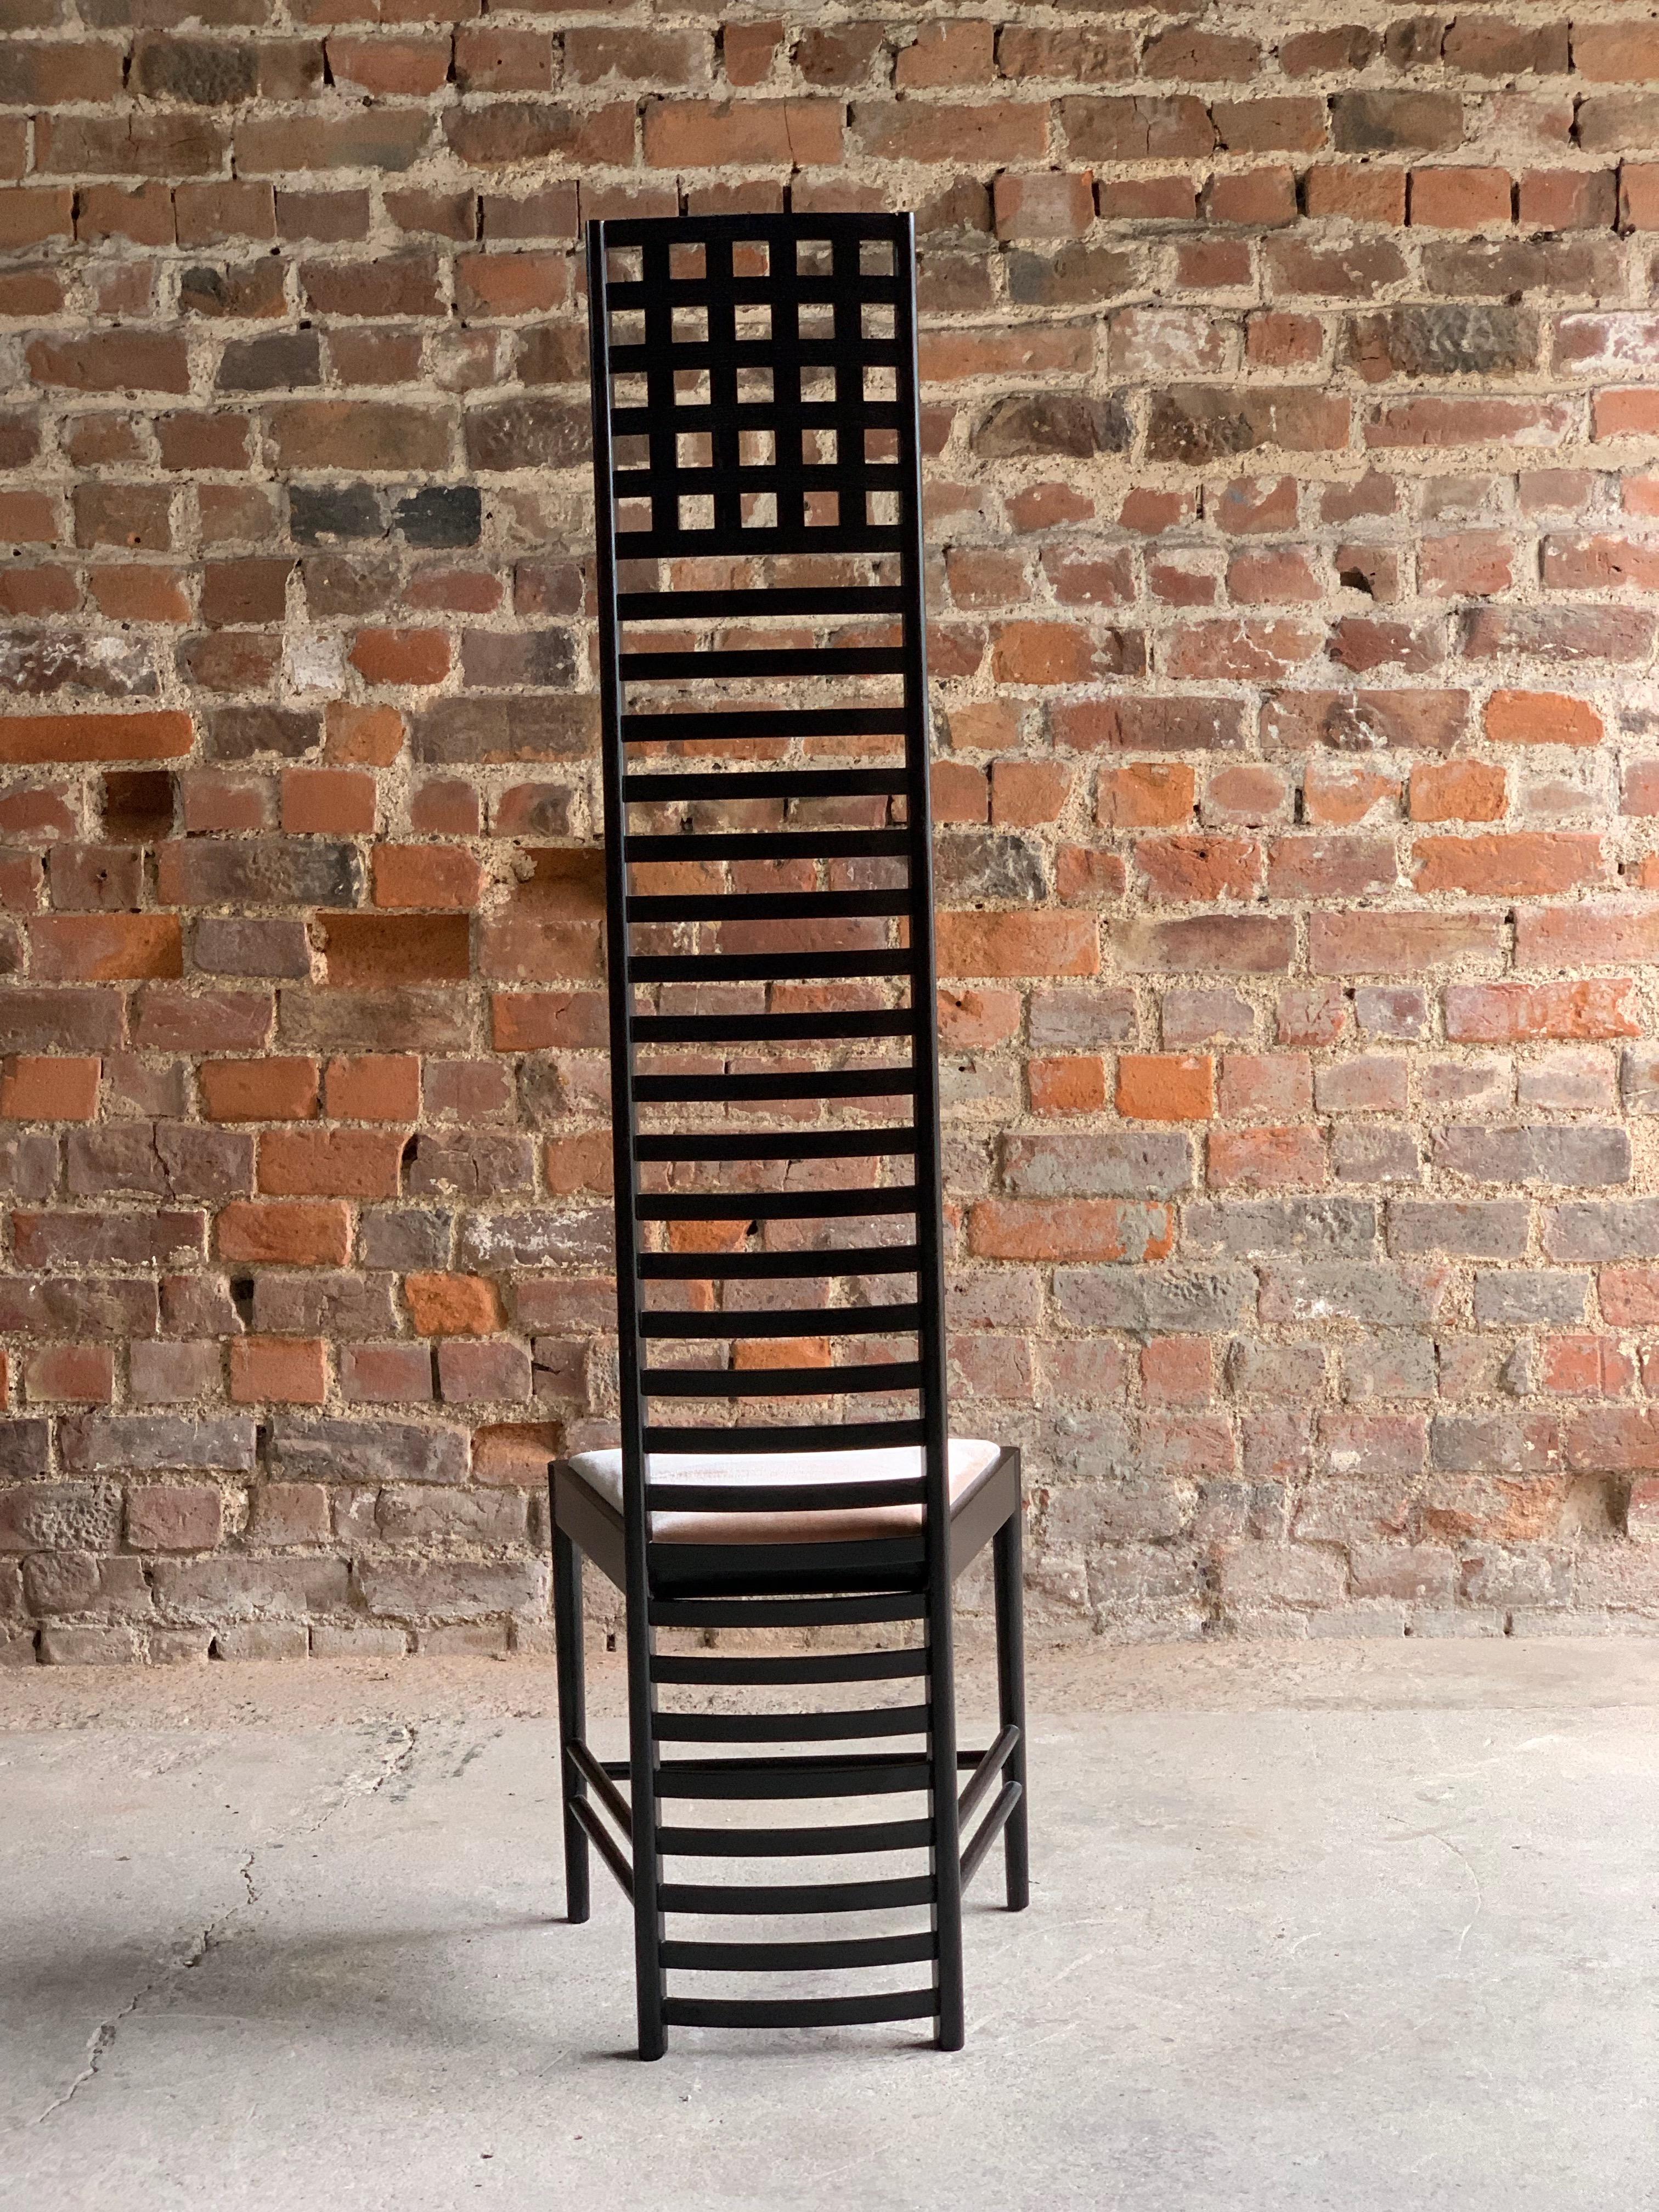 Late 20th Century Charles Renee Mackintosh Hill House 1 Chair by Cassina, 1995